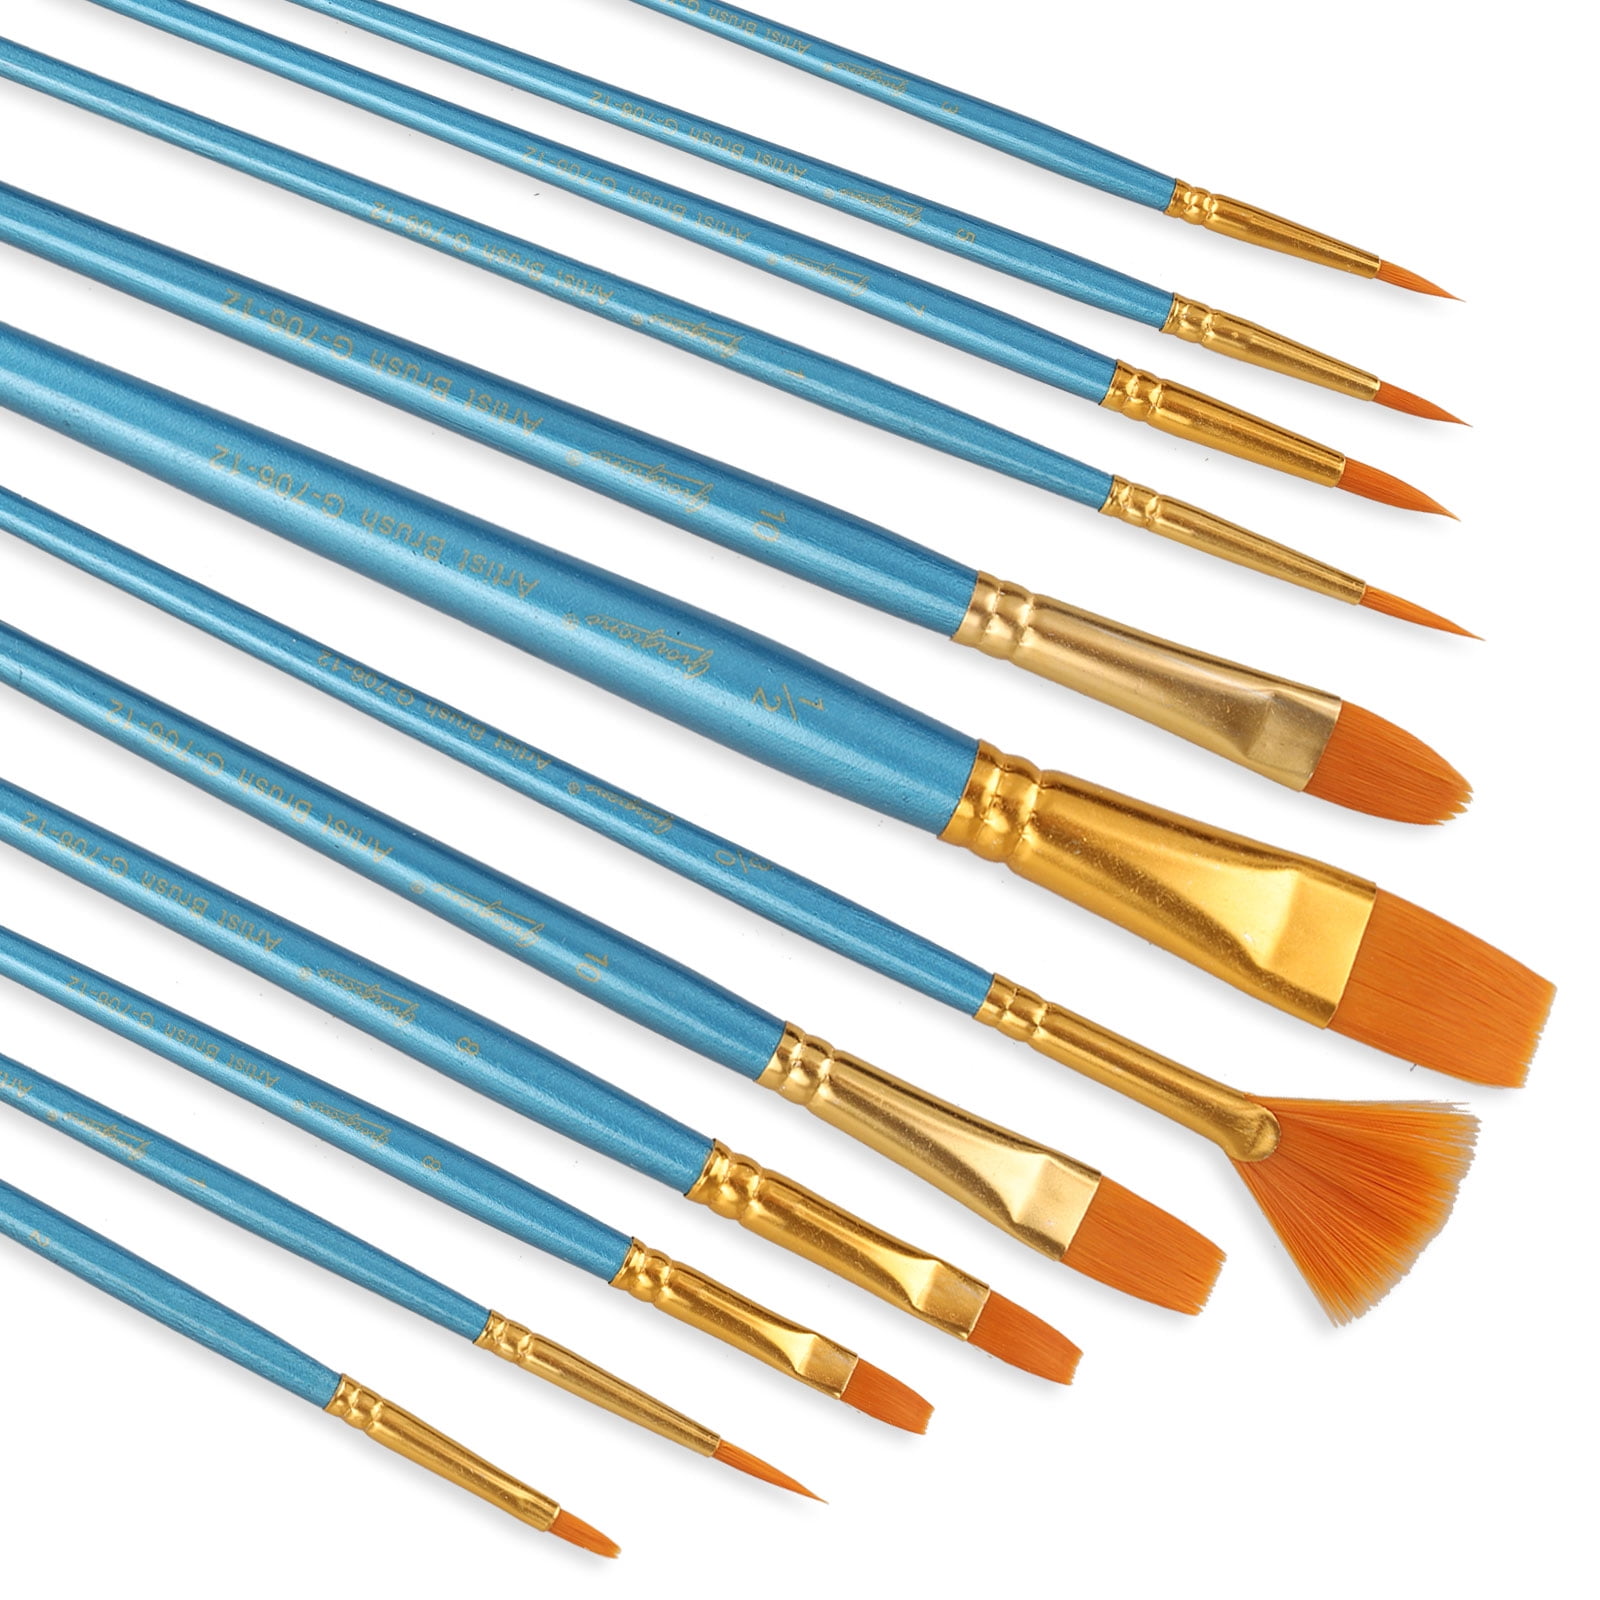 Paint Brushes Set, 4 Pack 40 Pcs Round Pointed Tip Paintbrushes Nylon Hair Artist Acrylic Paint Brushes for Acrylic Oil Watercolor, Face Nail Art